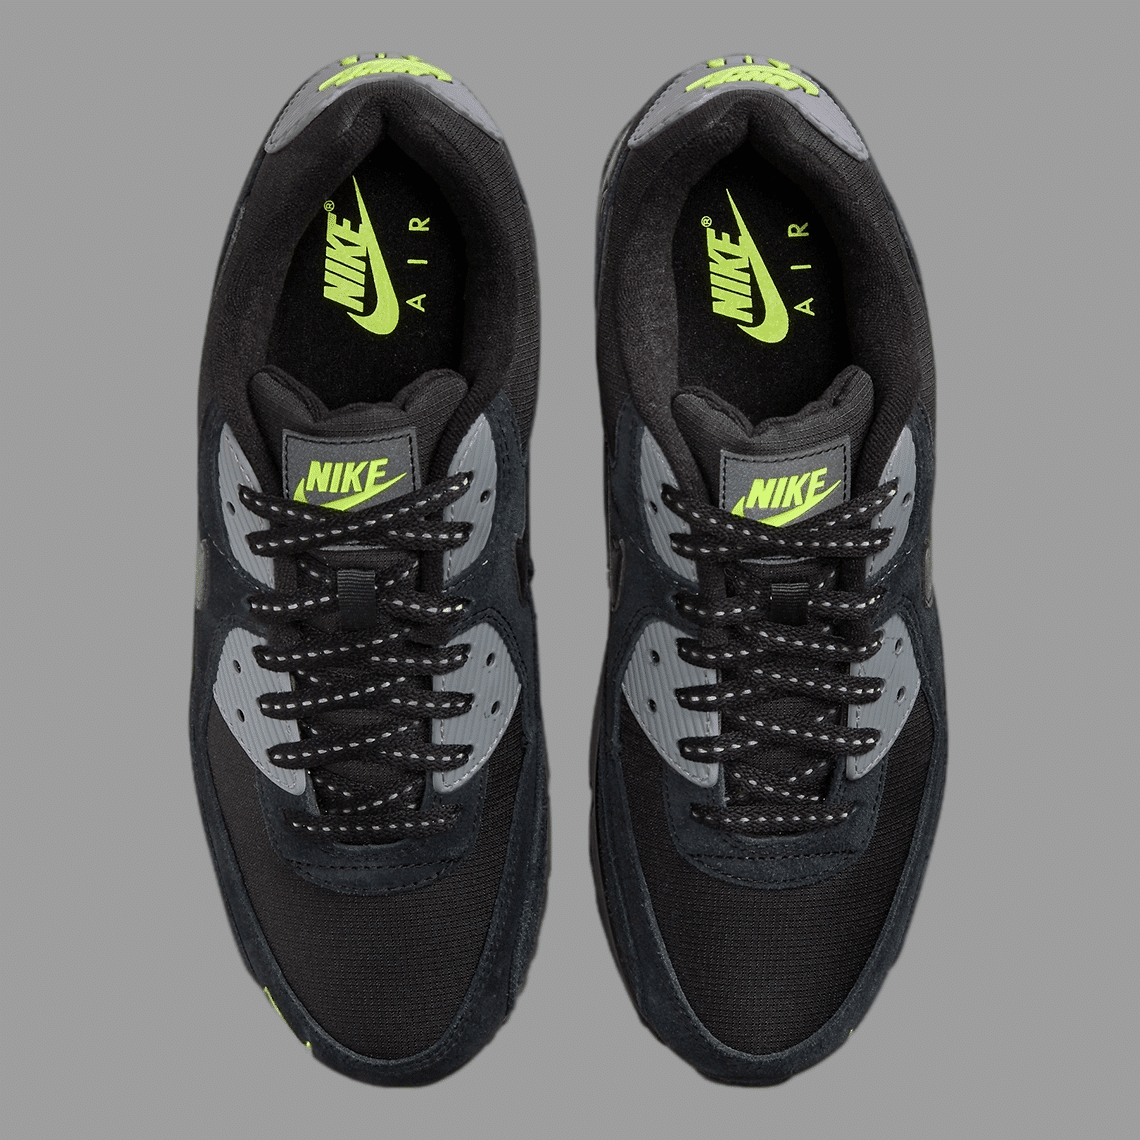 Mix Neon Green And Black Jet Nike Air Max 90